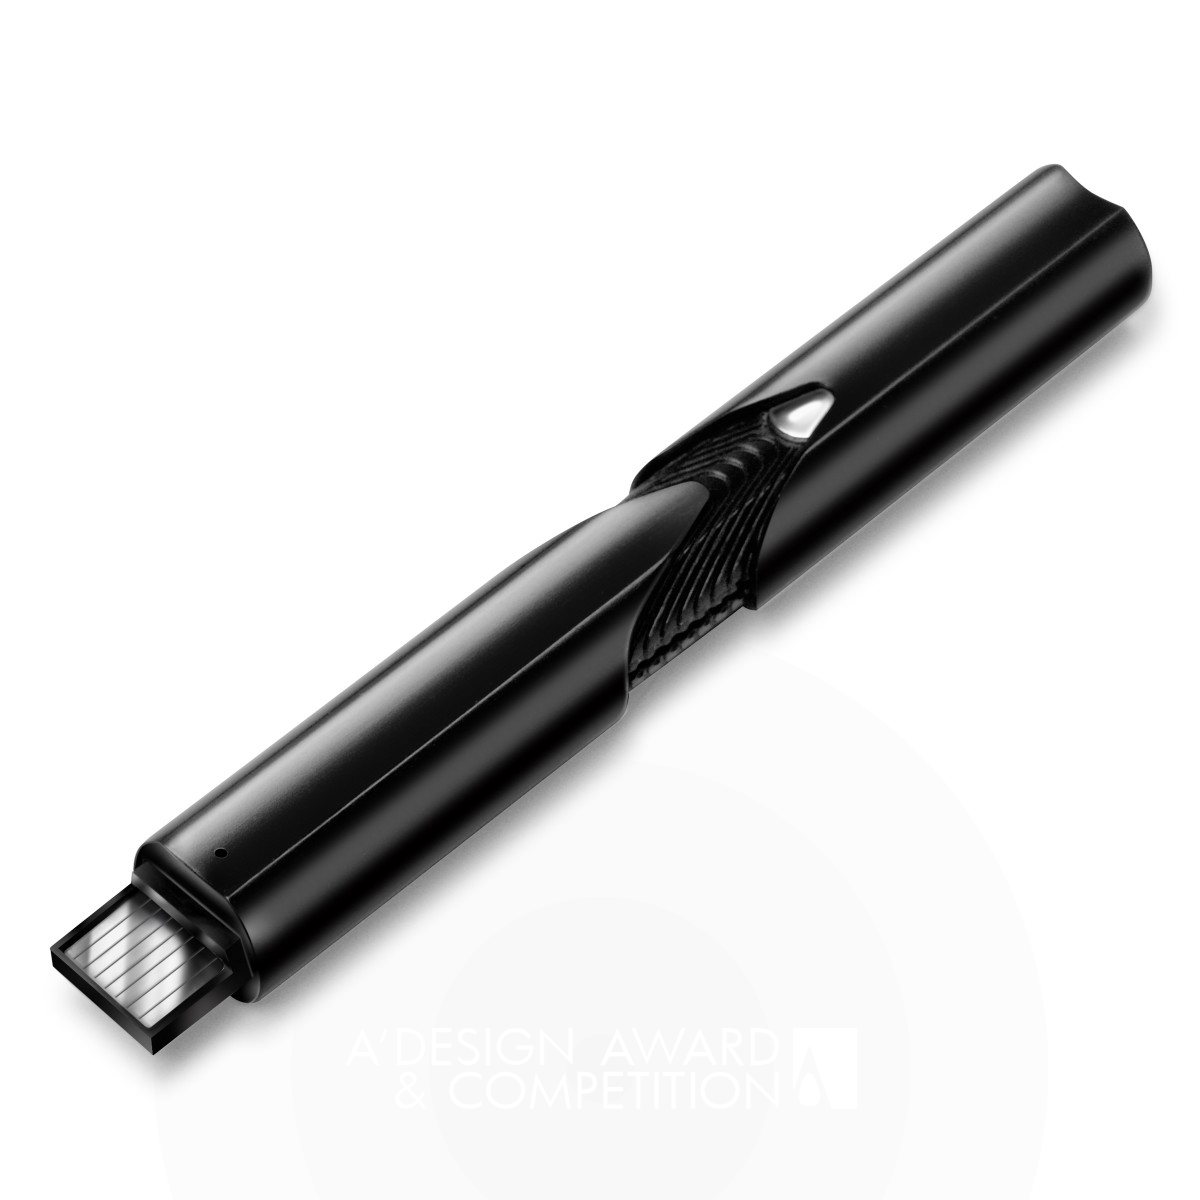 Retractable USB charging trimmer Personal hair trimmer by Yen Lau